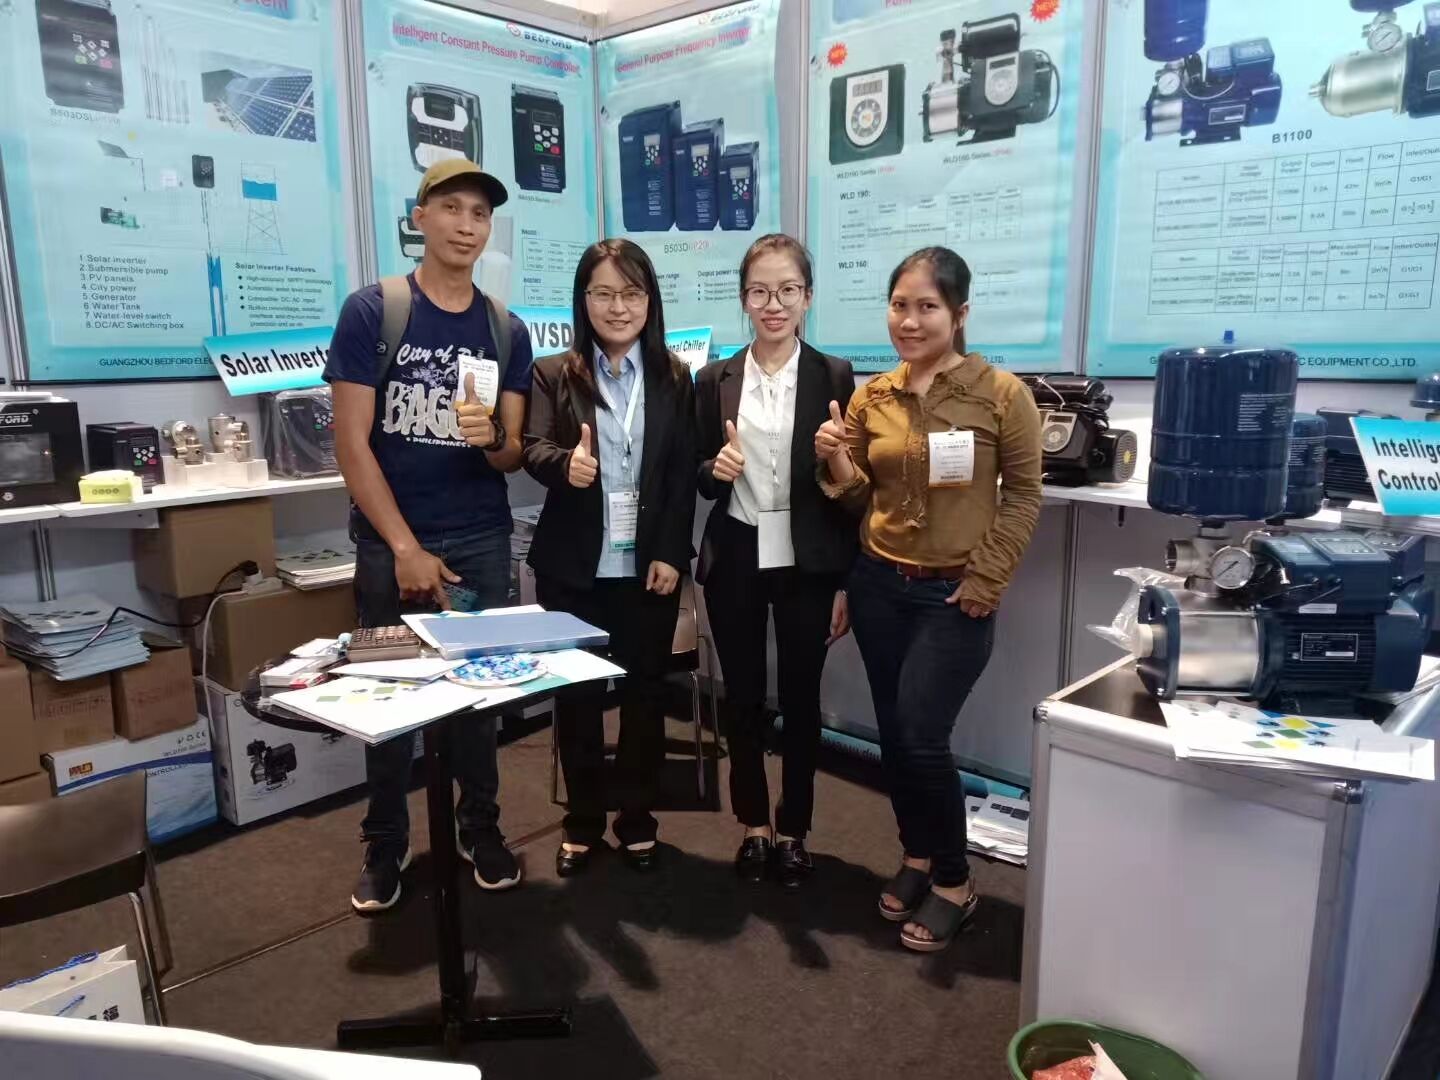 2019.3.20-2019.3.22, participated in the 2019 Philippines International Water Treatment Exhibition